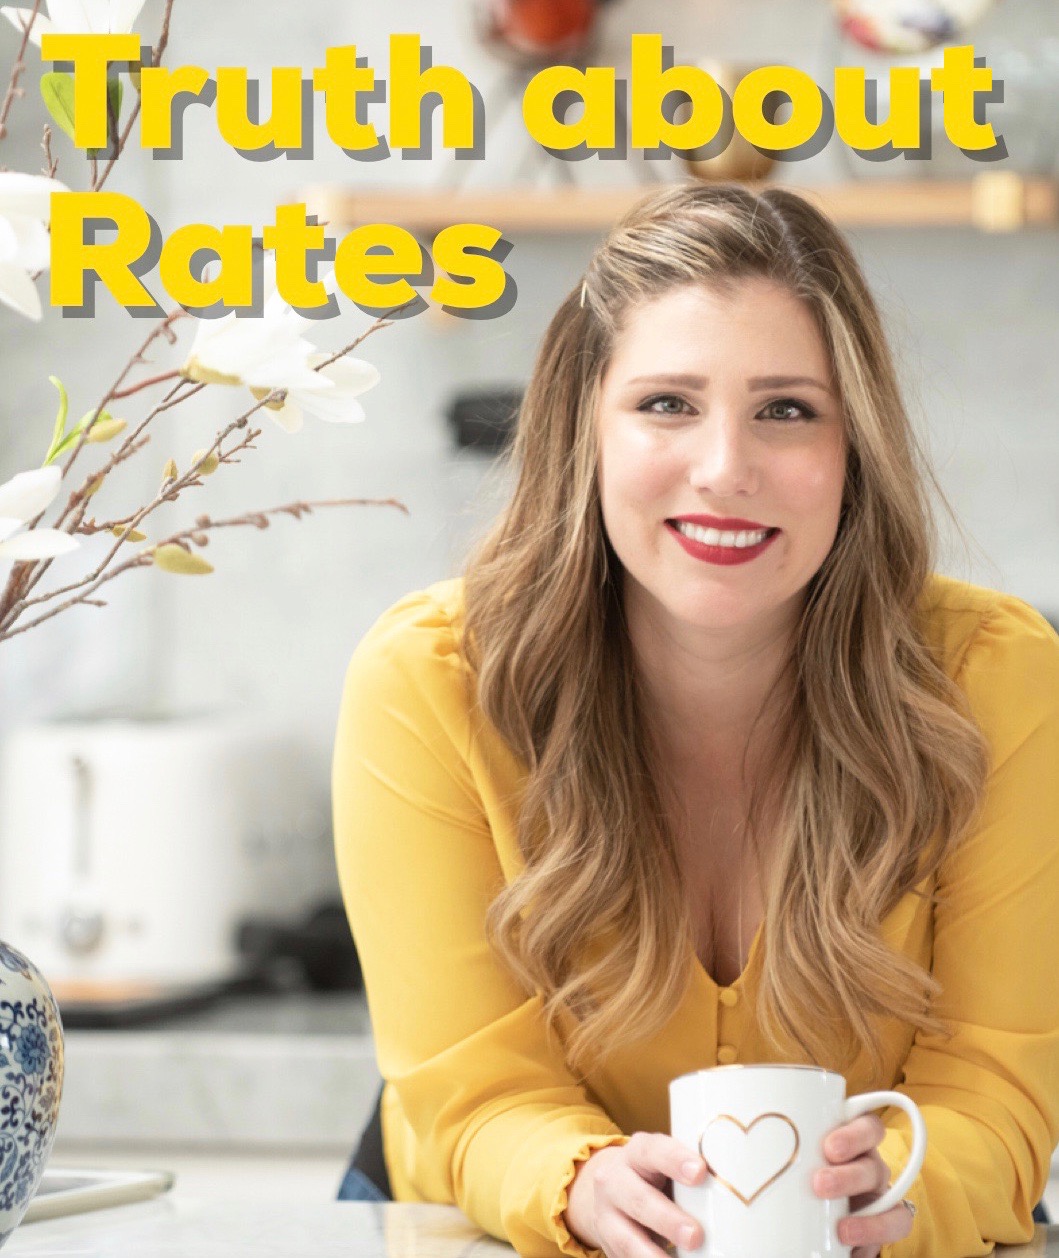 Truth about rates